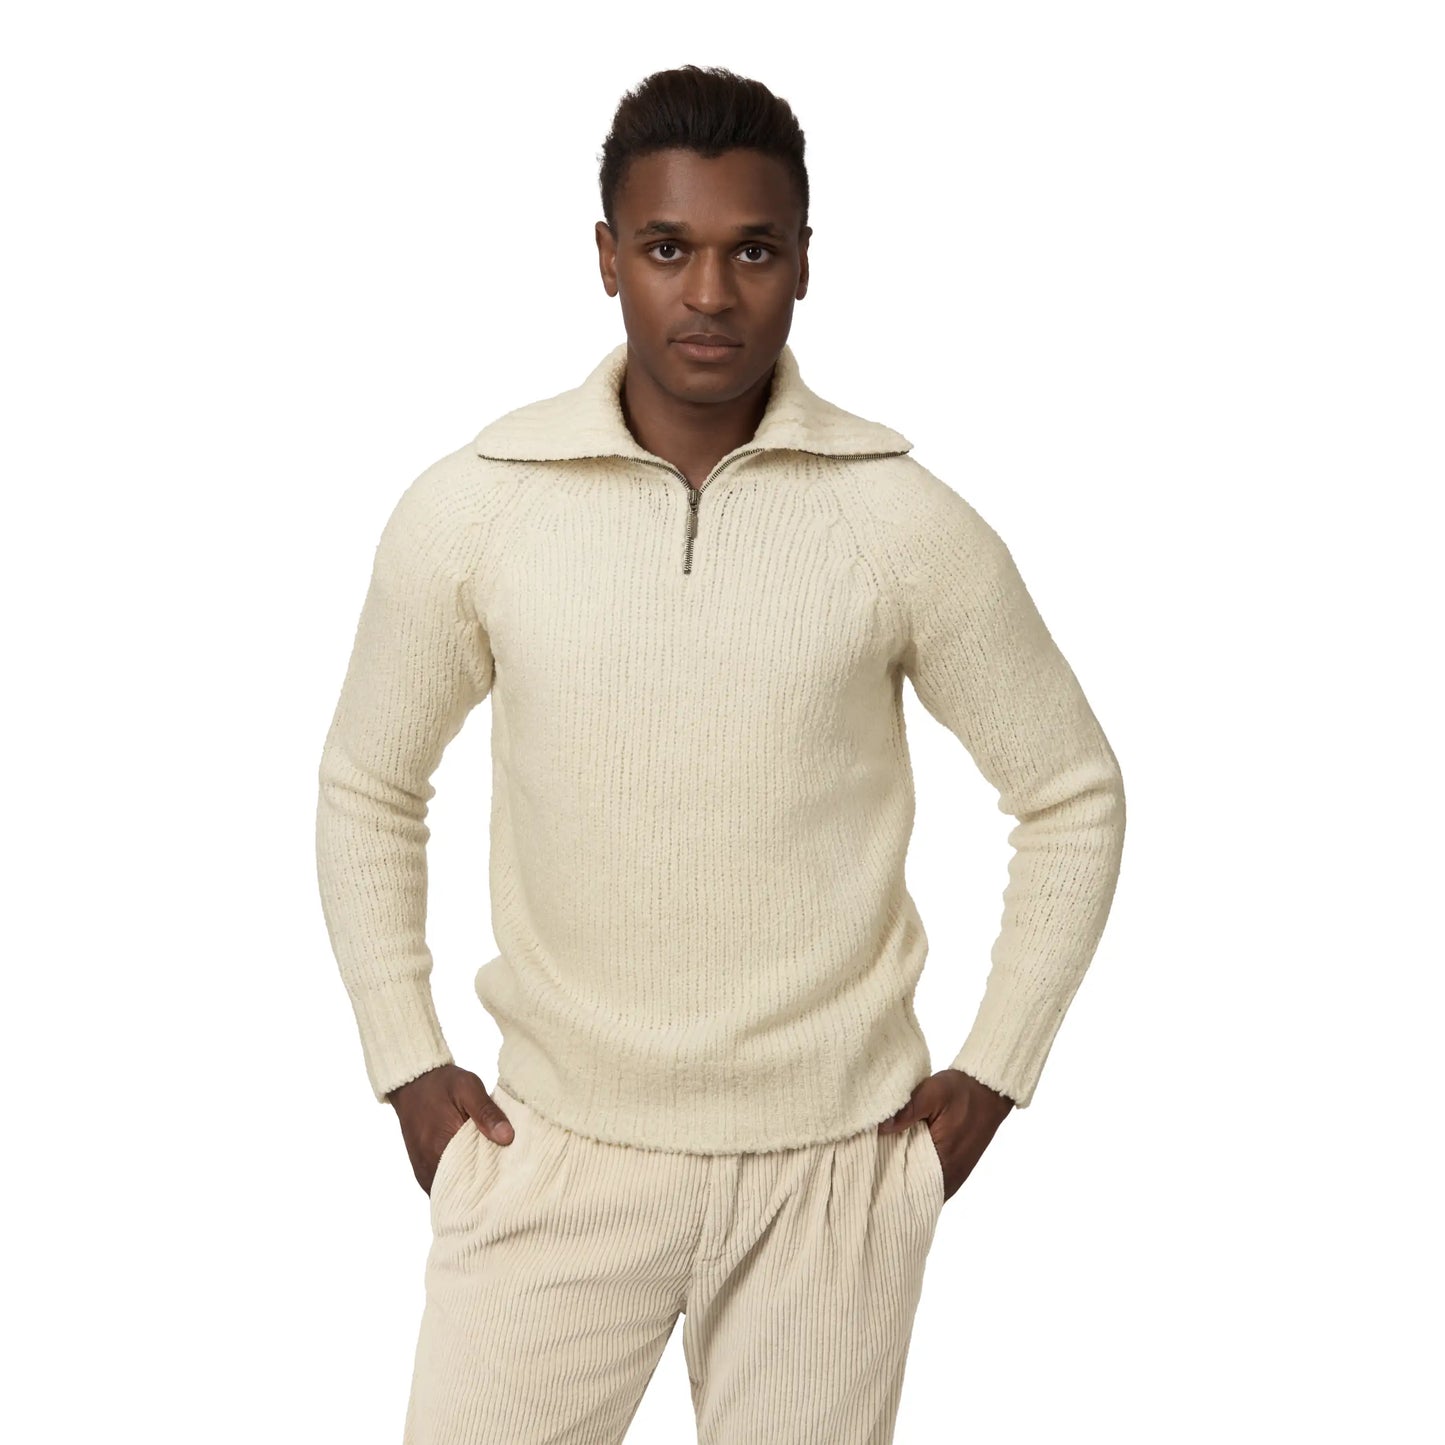 Turtleneck Knitted Champagne Sweater with Half-Zip